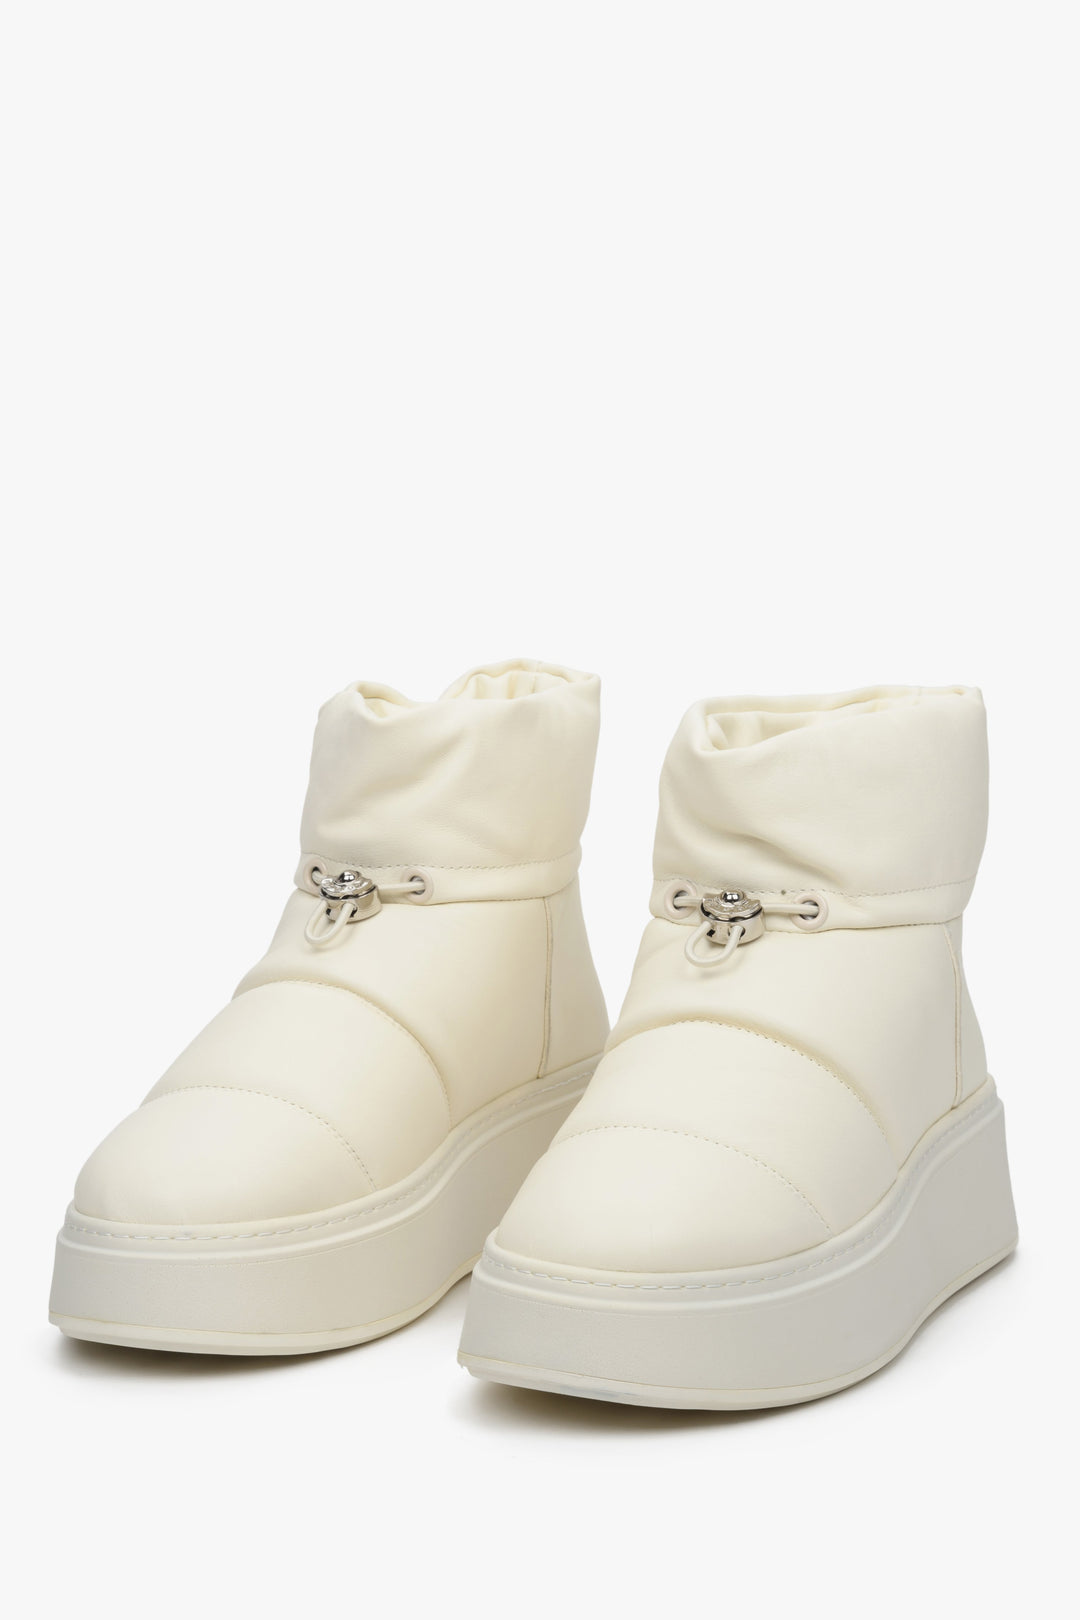 Women's white leather snow boots by Estro.